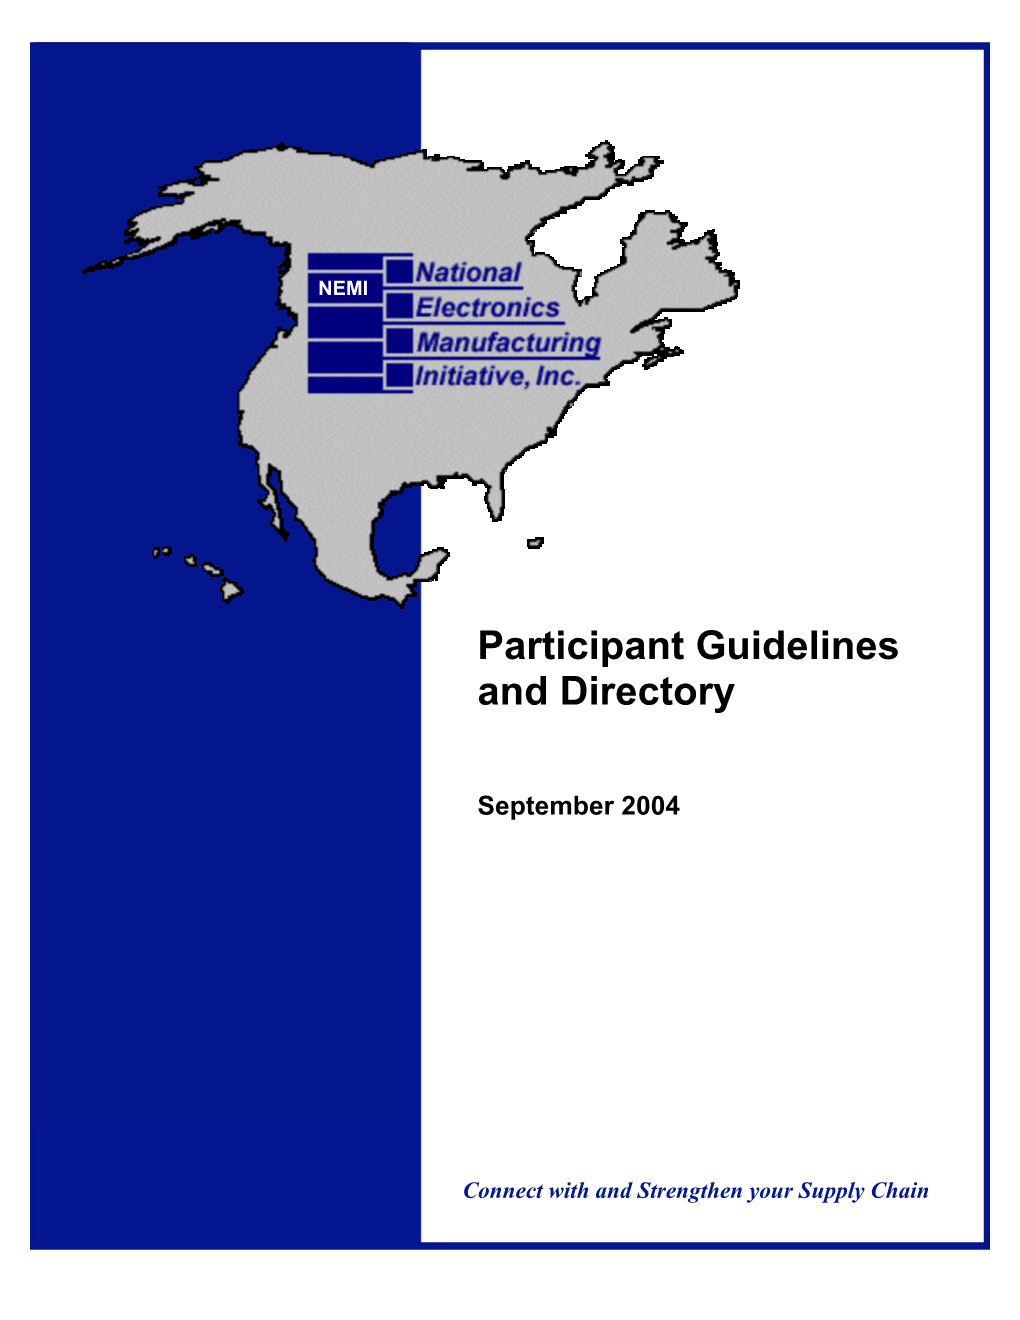 Participant Guidelines and Directory